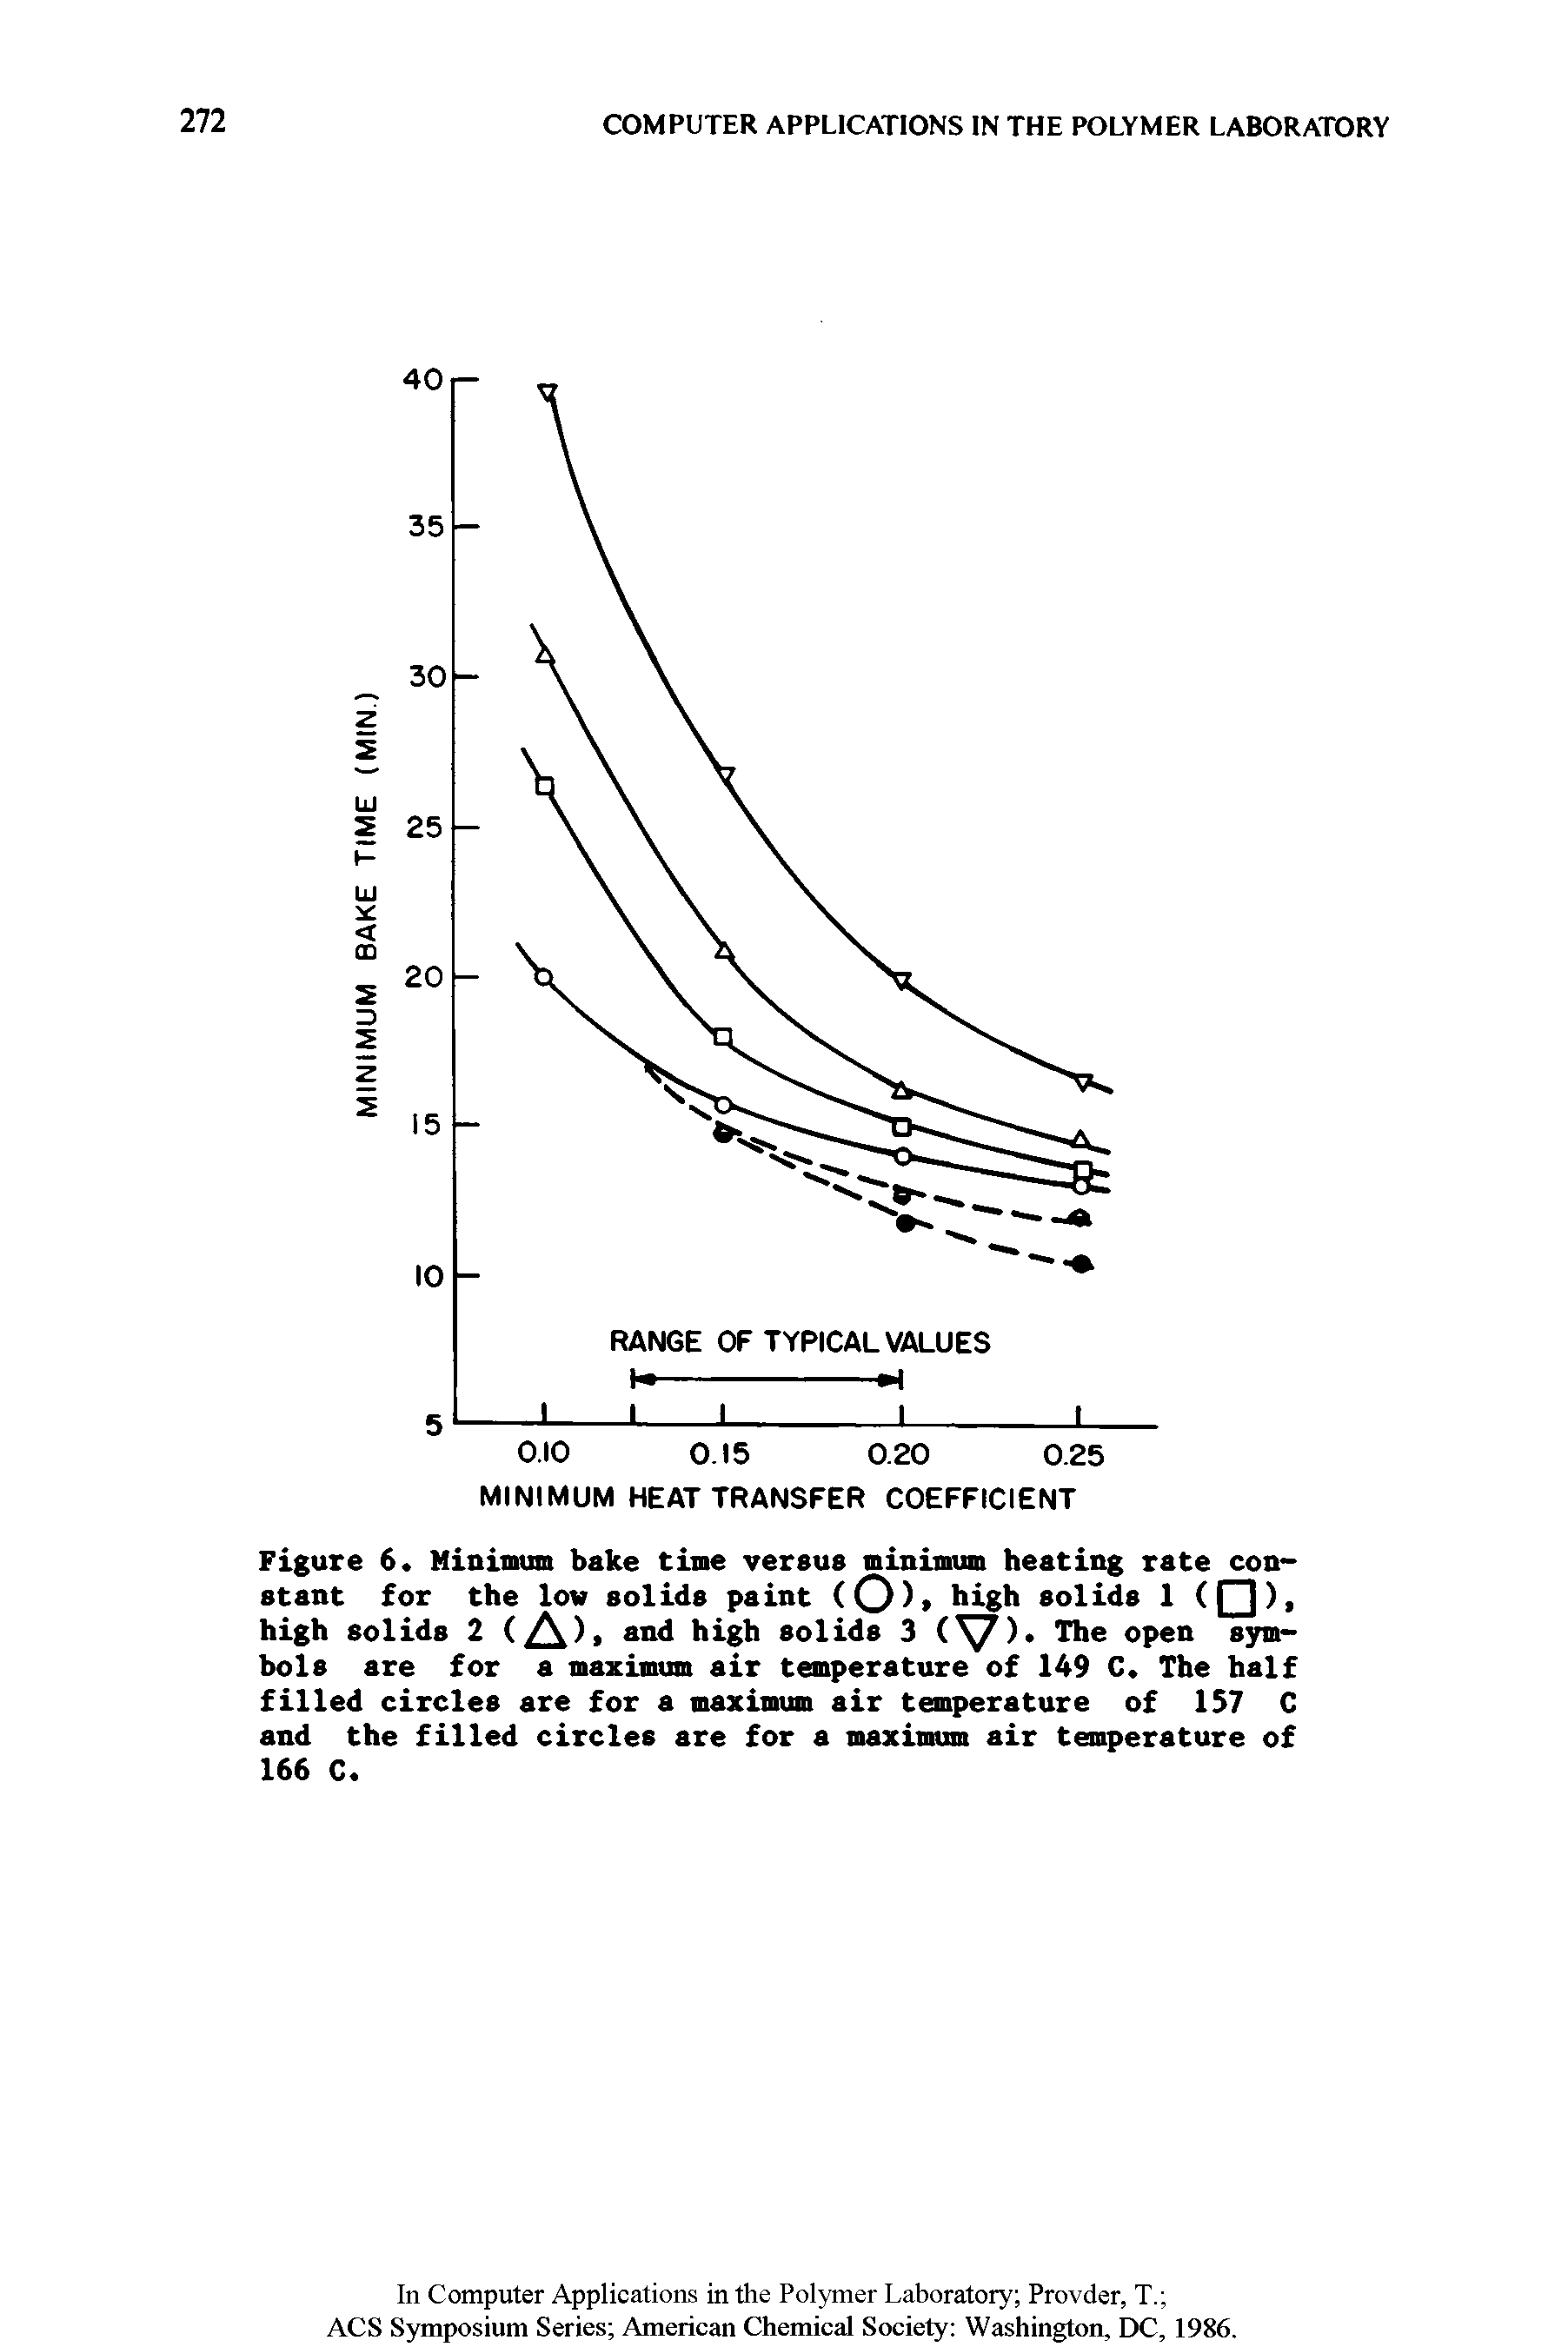 Figure 6. Minimum bake time versus minimum heating rate constant for the low solids paint (O) high solids 1 ( ), high solids 2 ( ), and high solids 3 ( ). The open symbols are for a maximum air temperature of 149 C. The half filled circles are for a maximum air temperature of 157 C and the filled circles are for a maximum air temperature of 166 C.